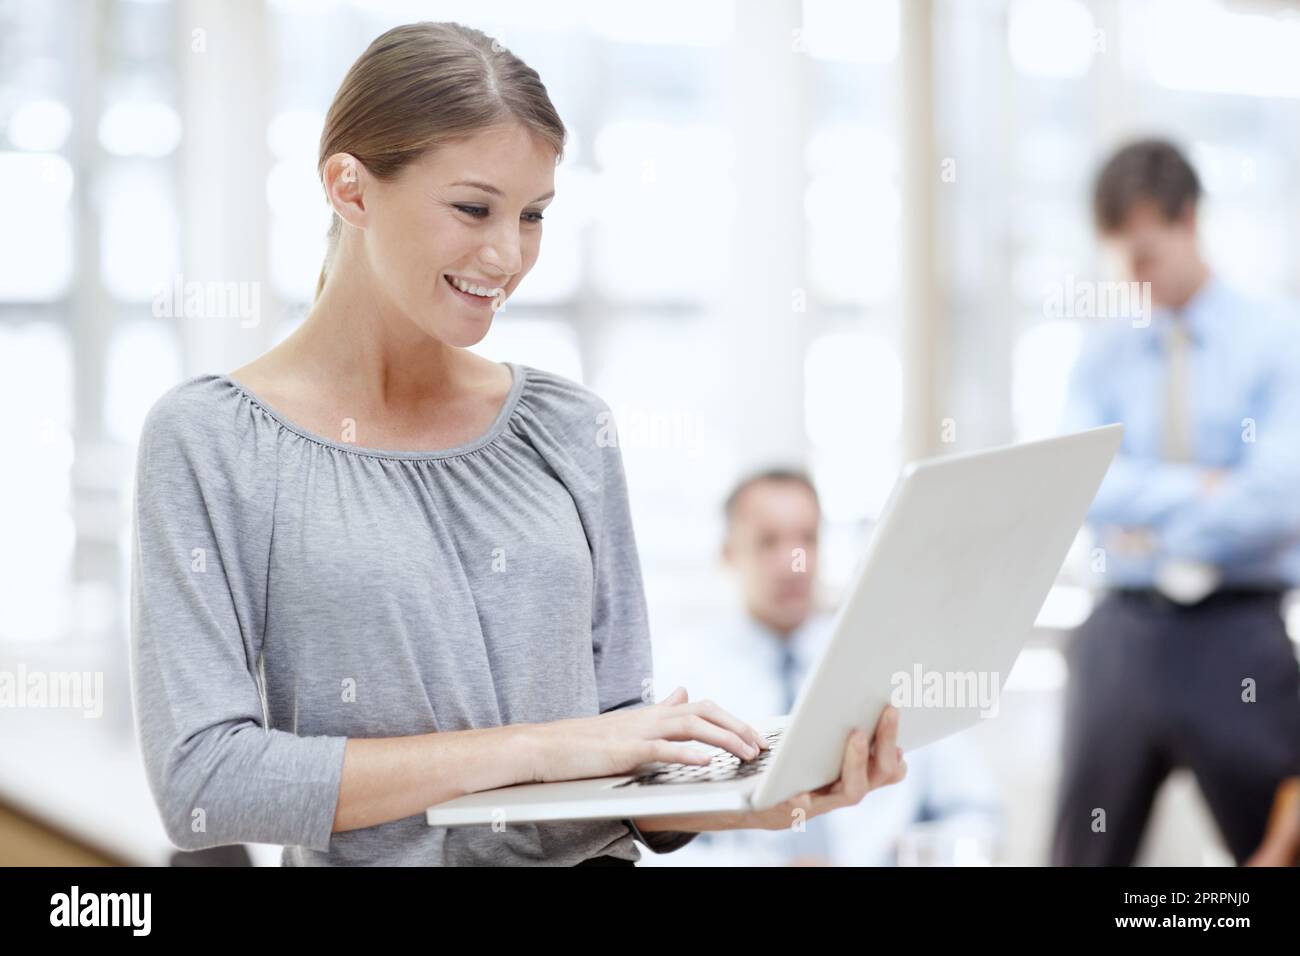 Checking out the new work layout. An attractive young woman using her laptop in the office with her colleagues behind her. Stock Photo